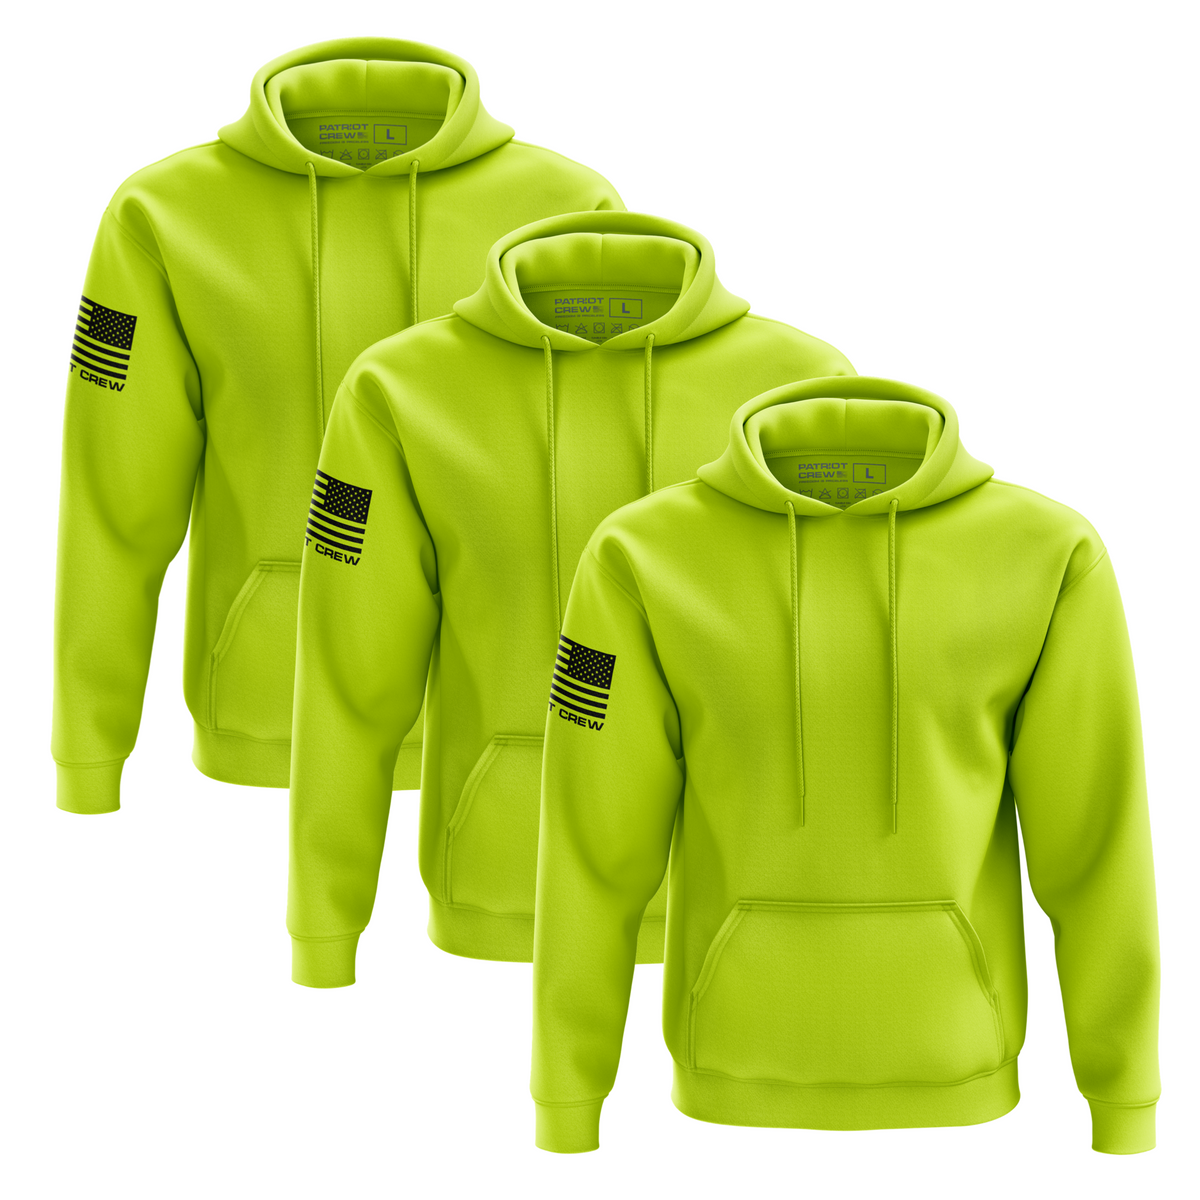 Safety Yellow Hoodie (3 Pack)